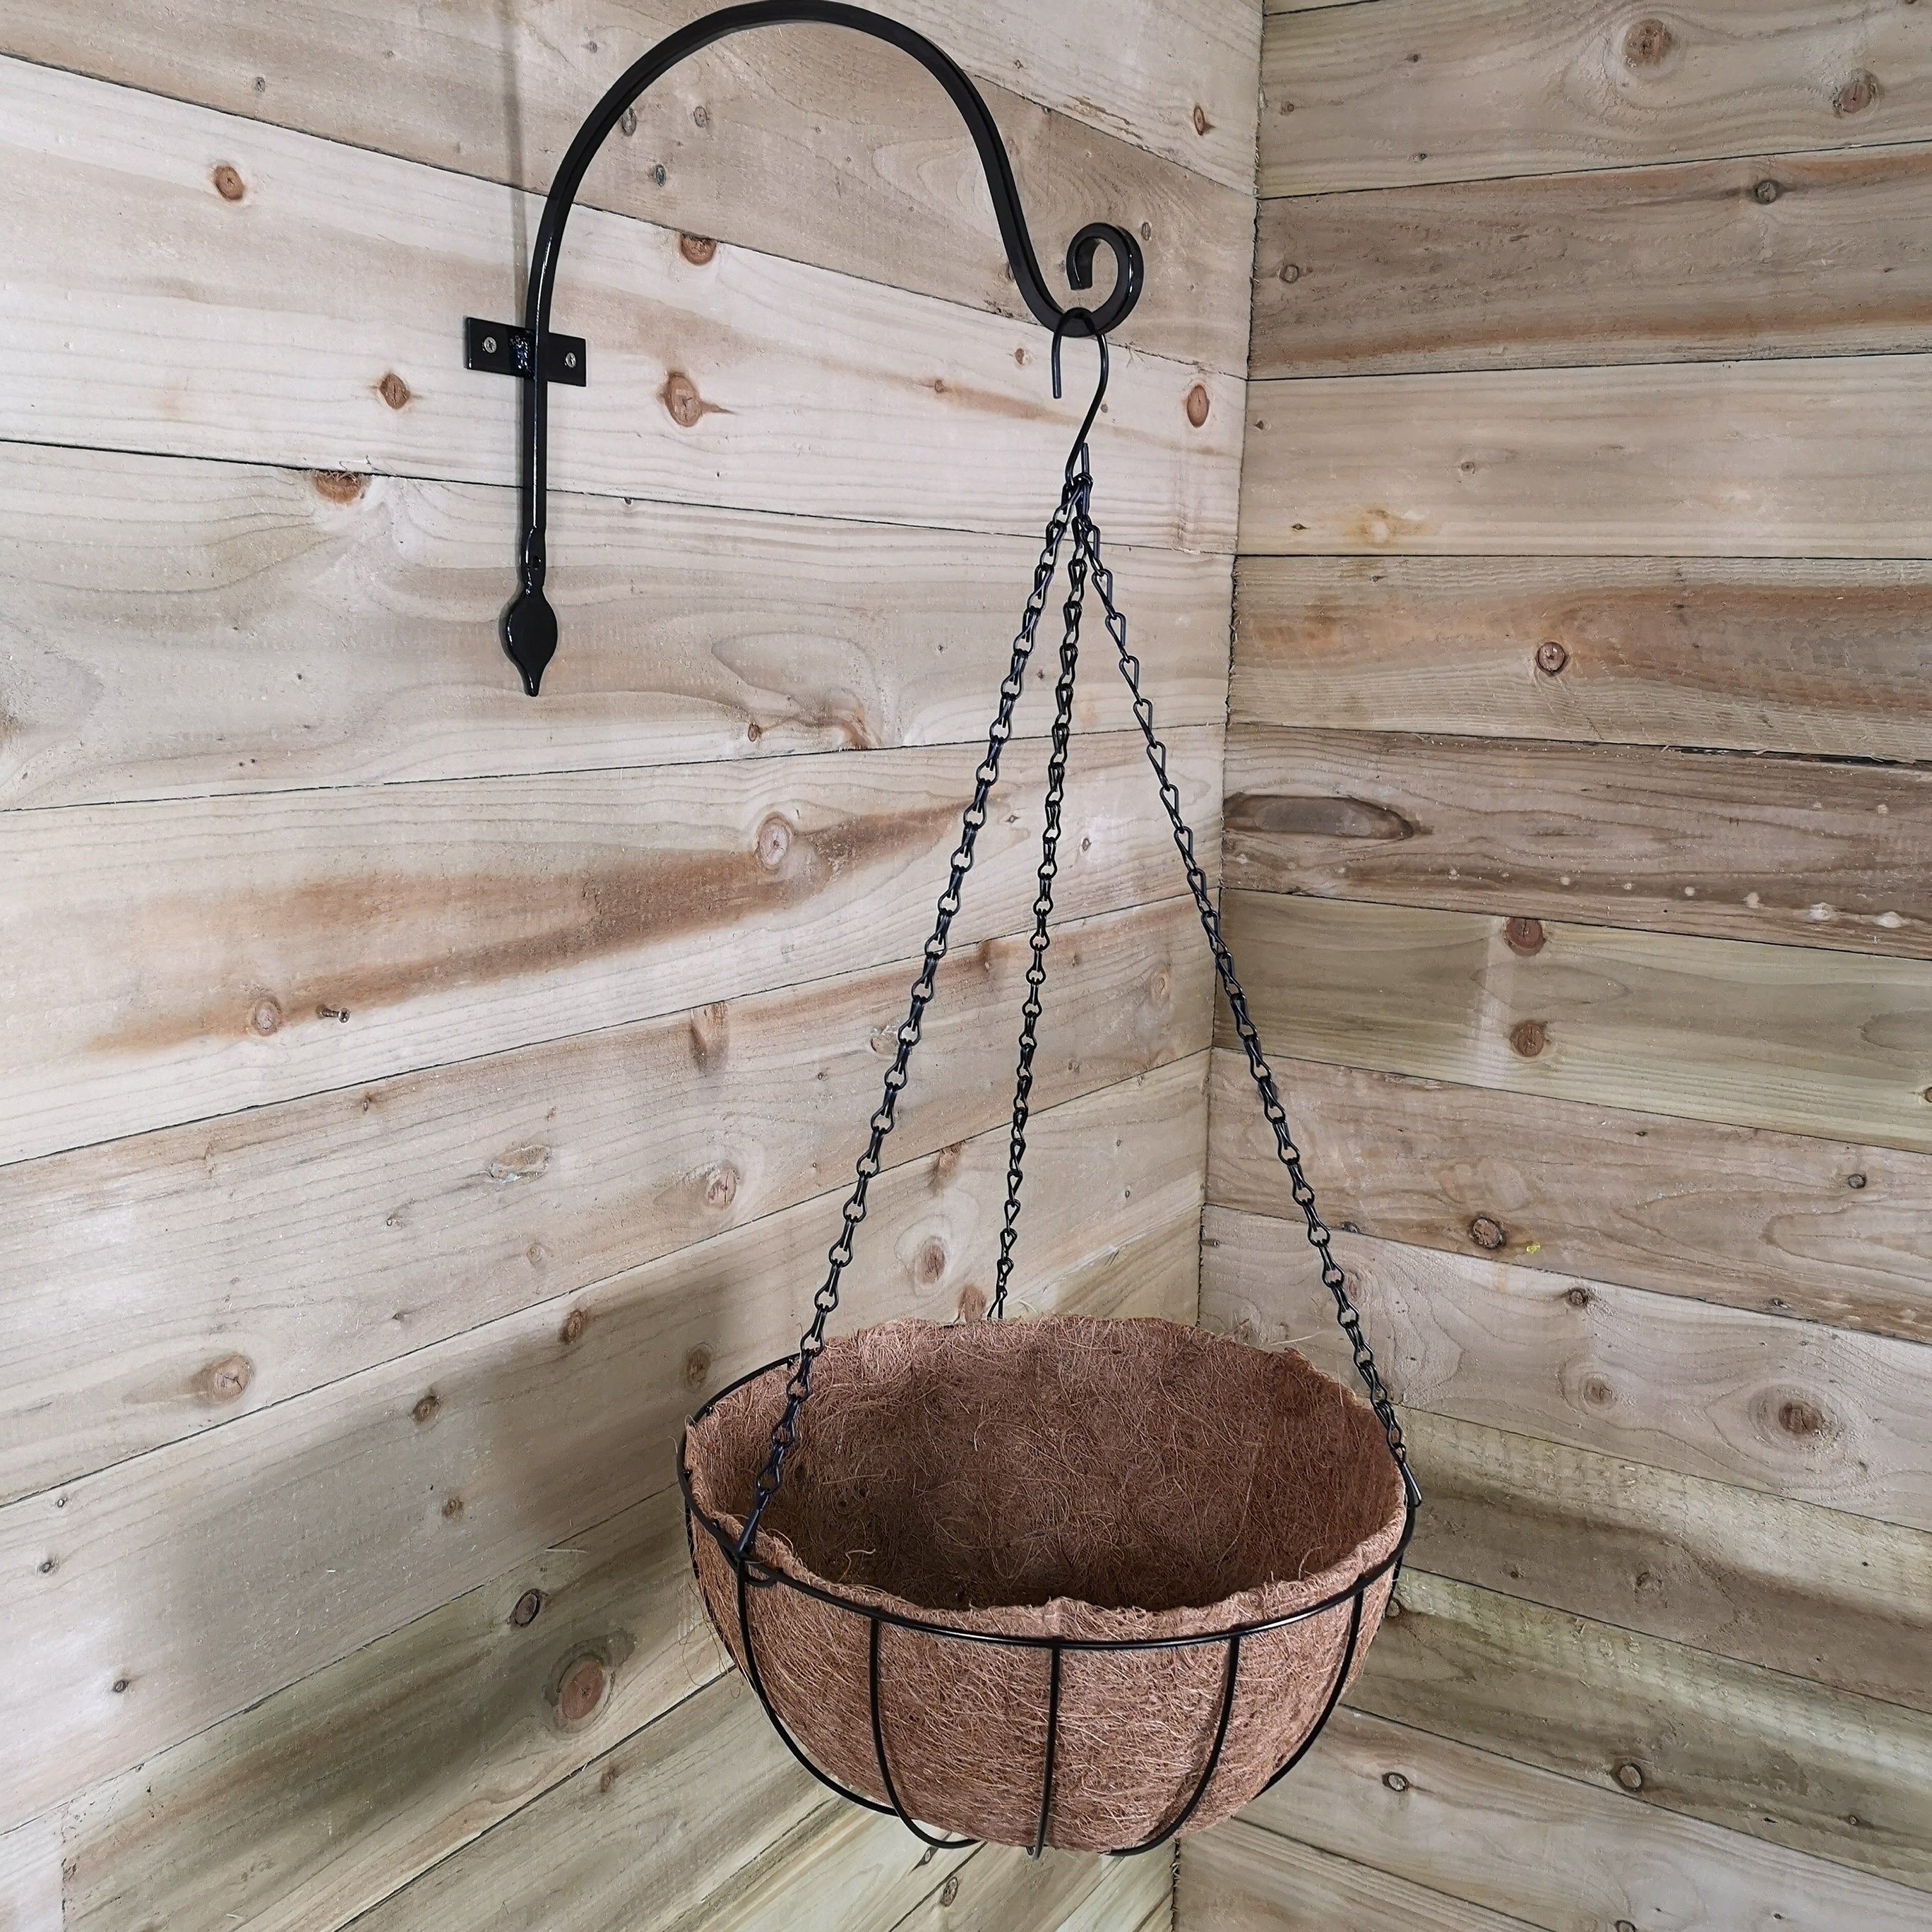 Pack of 2 Tom Chambers Black Metal Garden Plant Hanging Basket with WaterSave Coco Fibre Liner 35cm - No Bracket